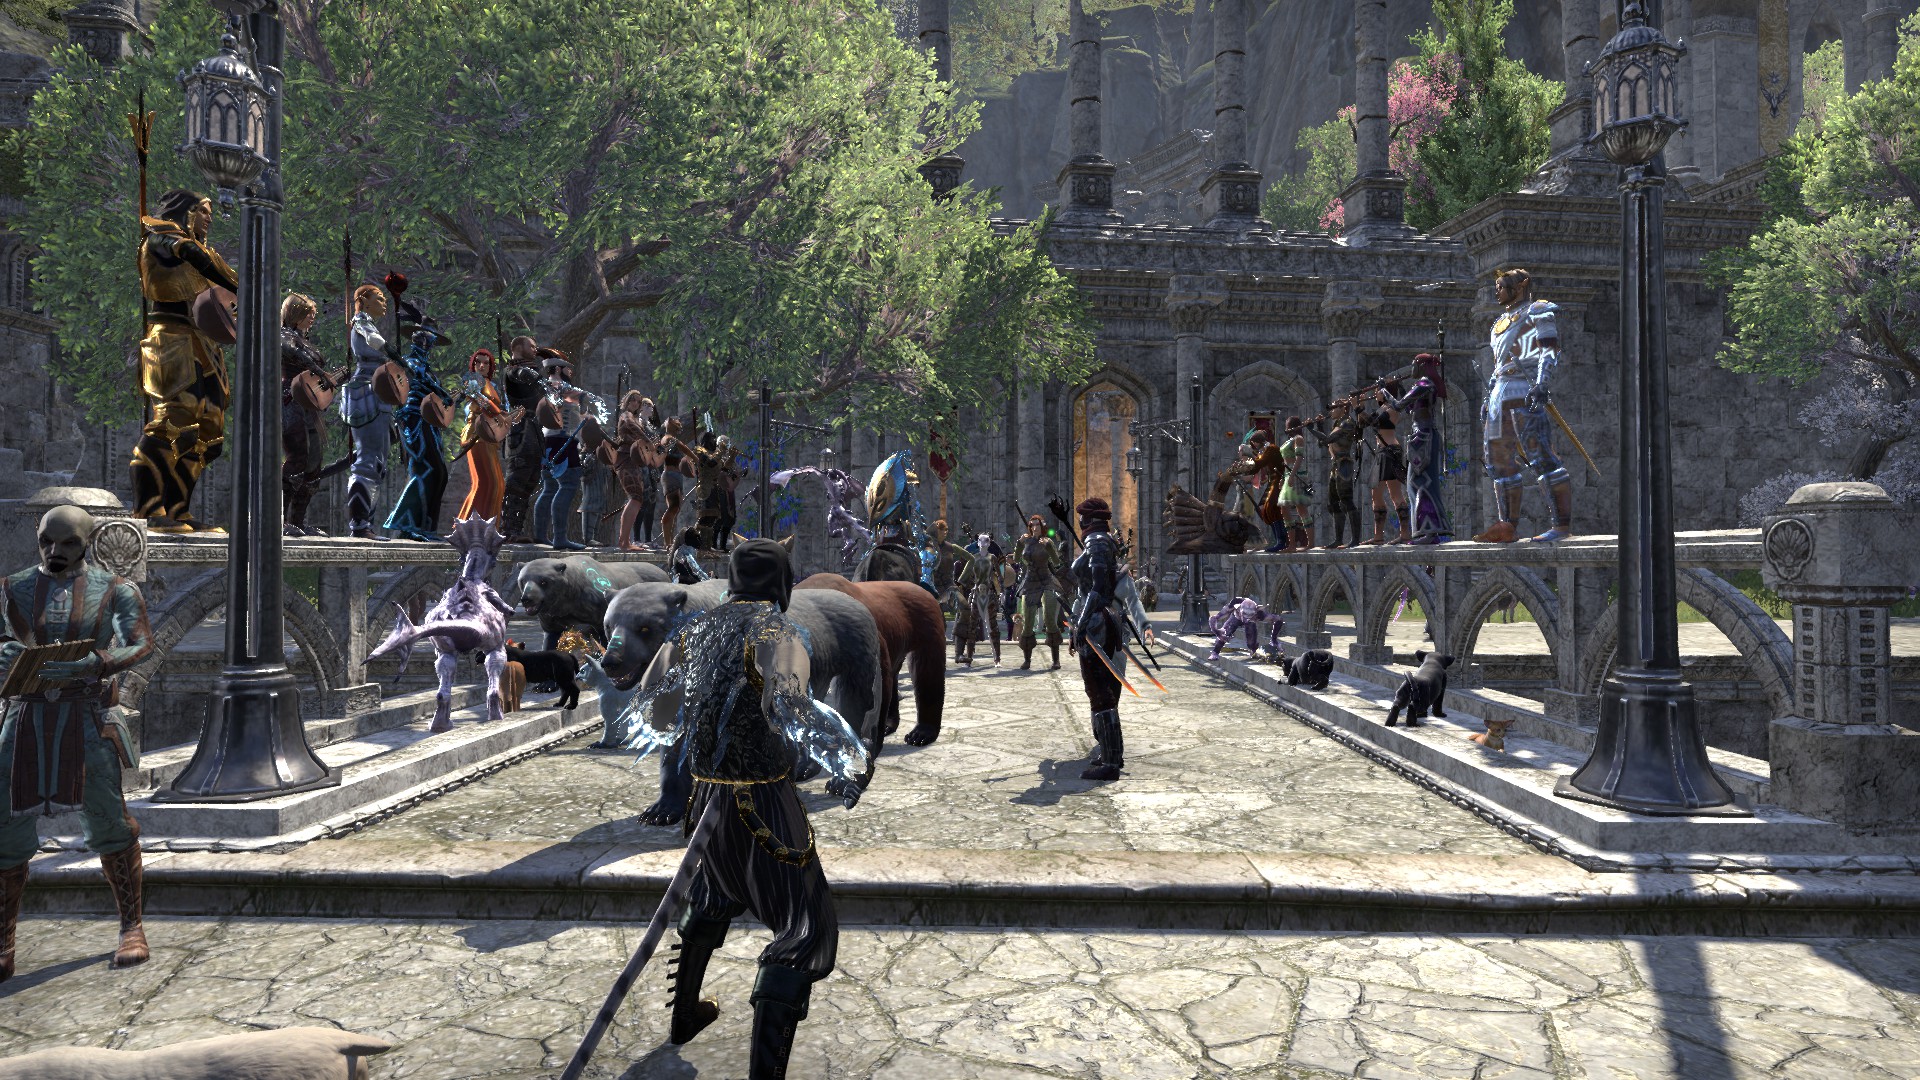 A player in Elder Scrolls Oneline stands on a bridge where many players are standing together playing instruments.